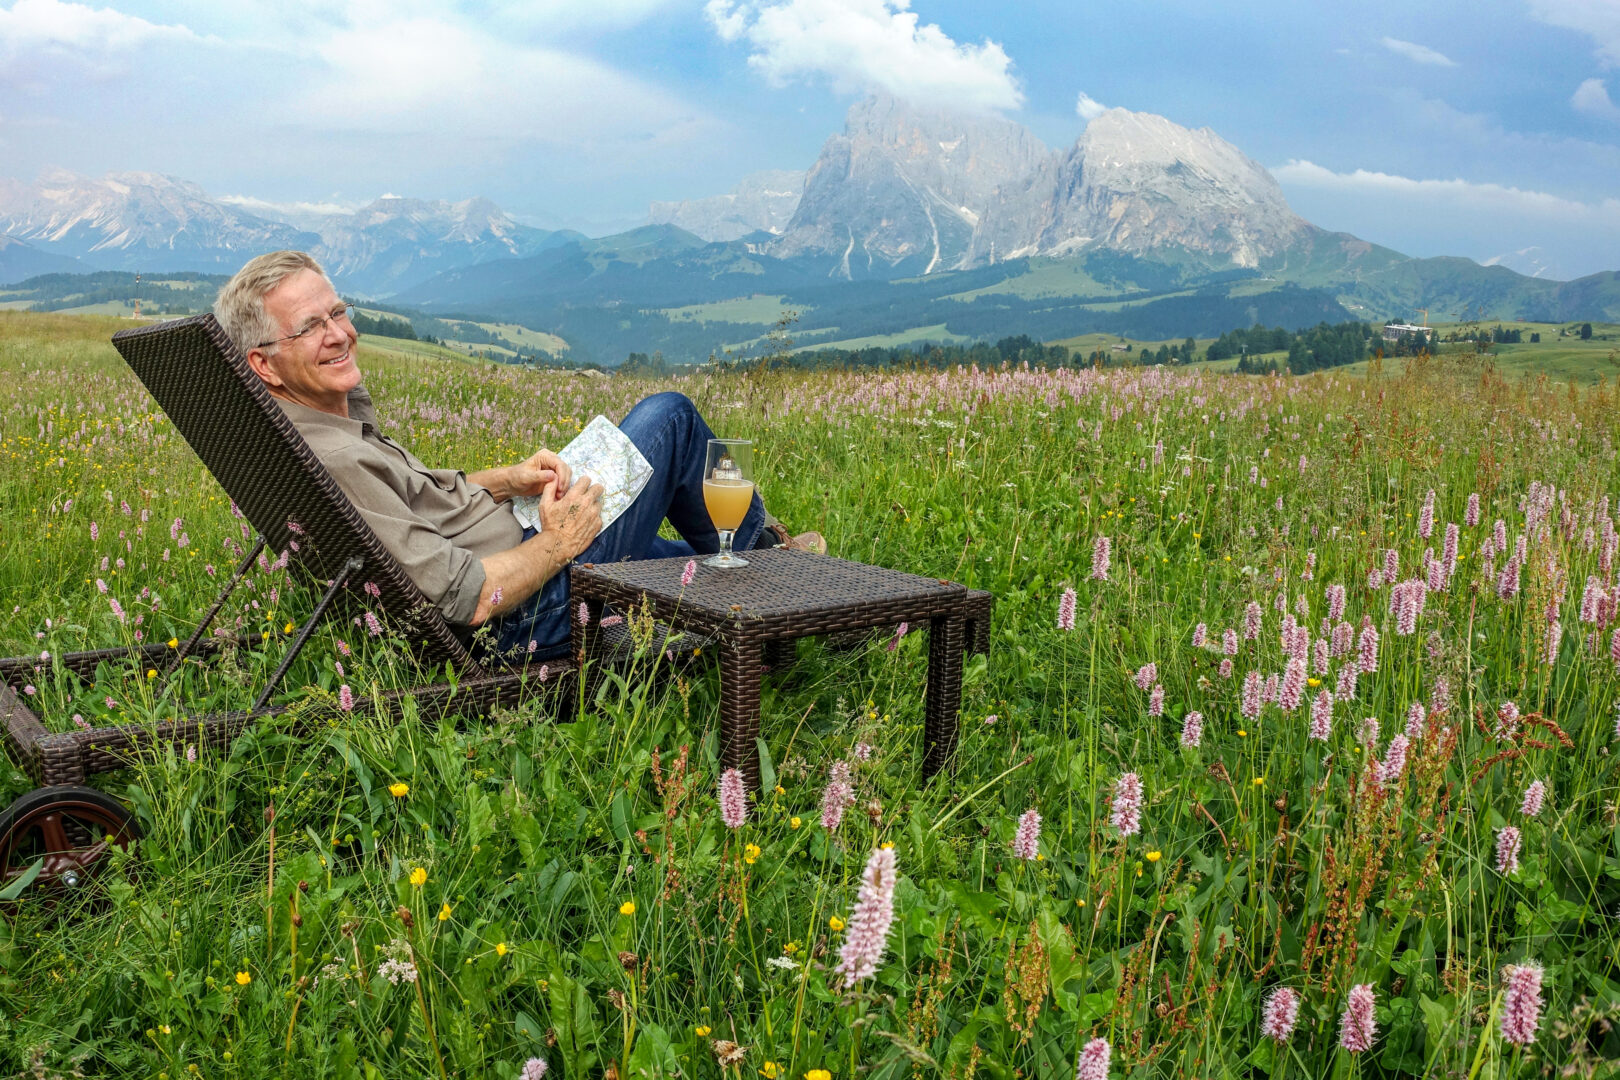 Taking a break from filming in Italy's Dolomites.